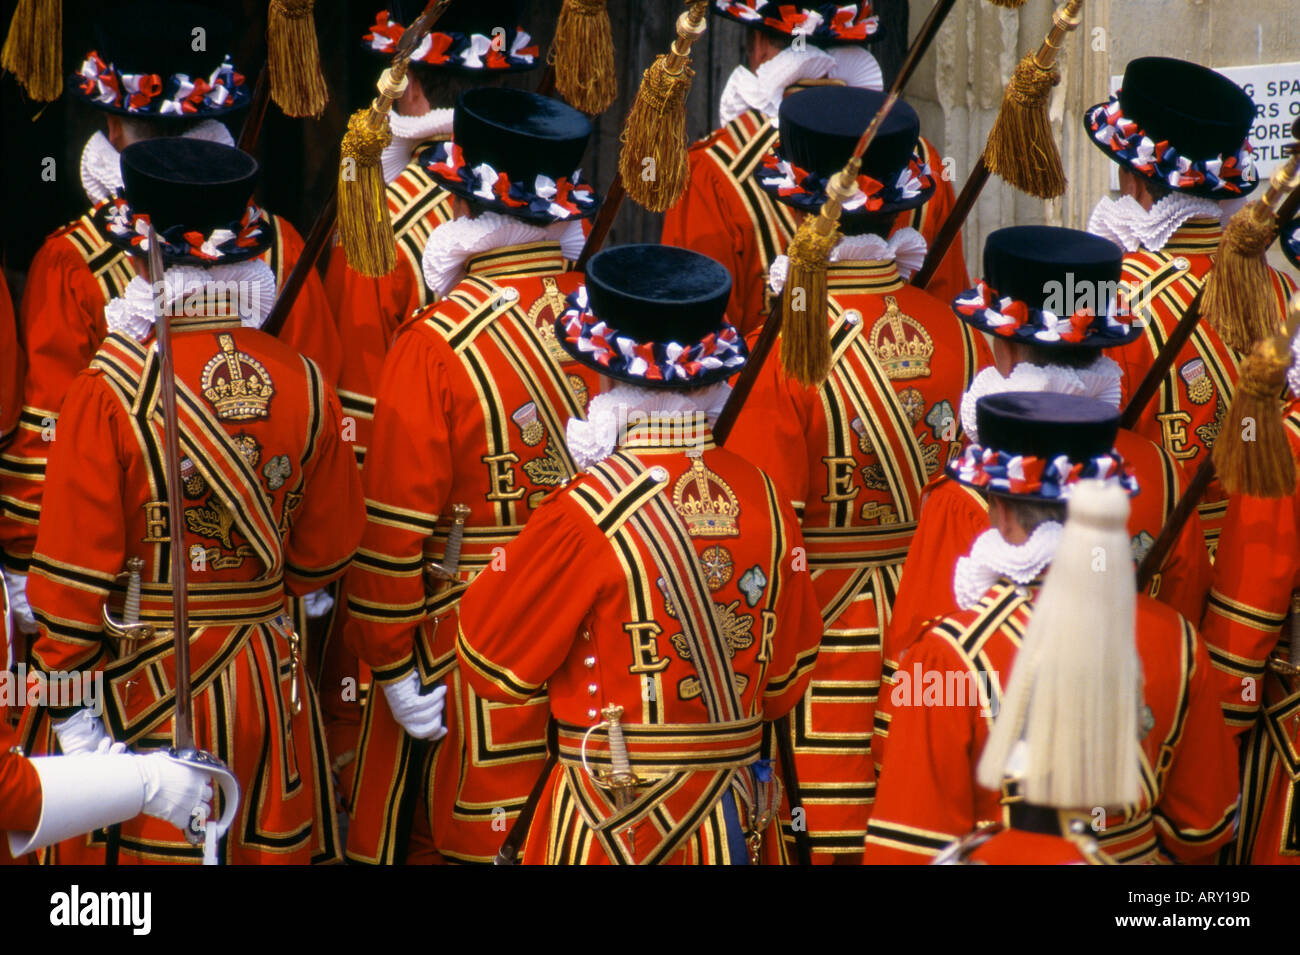 Beefeaters at the Tower of London England Stock Photo